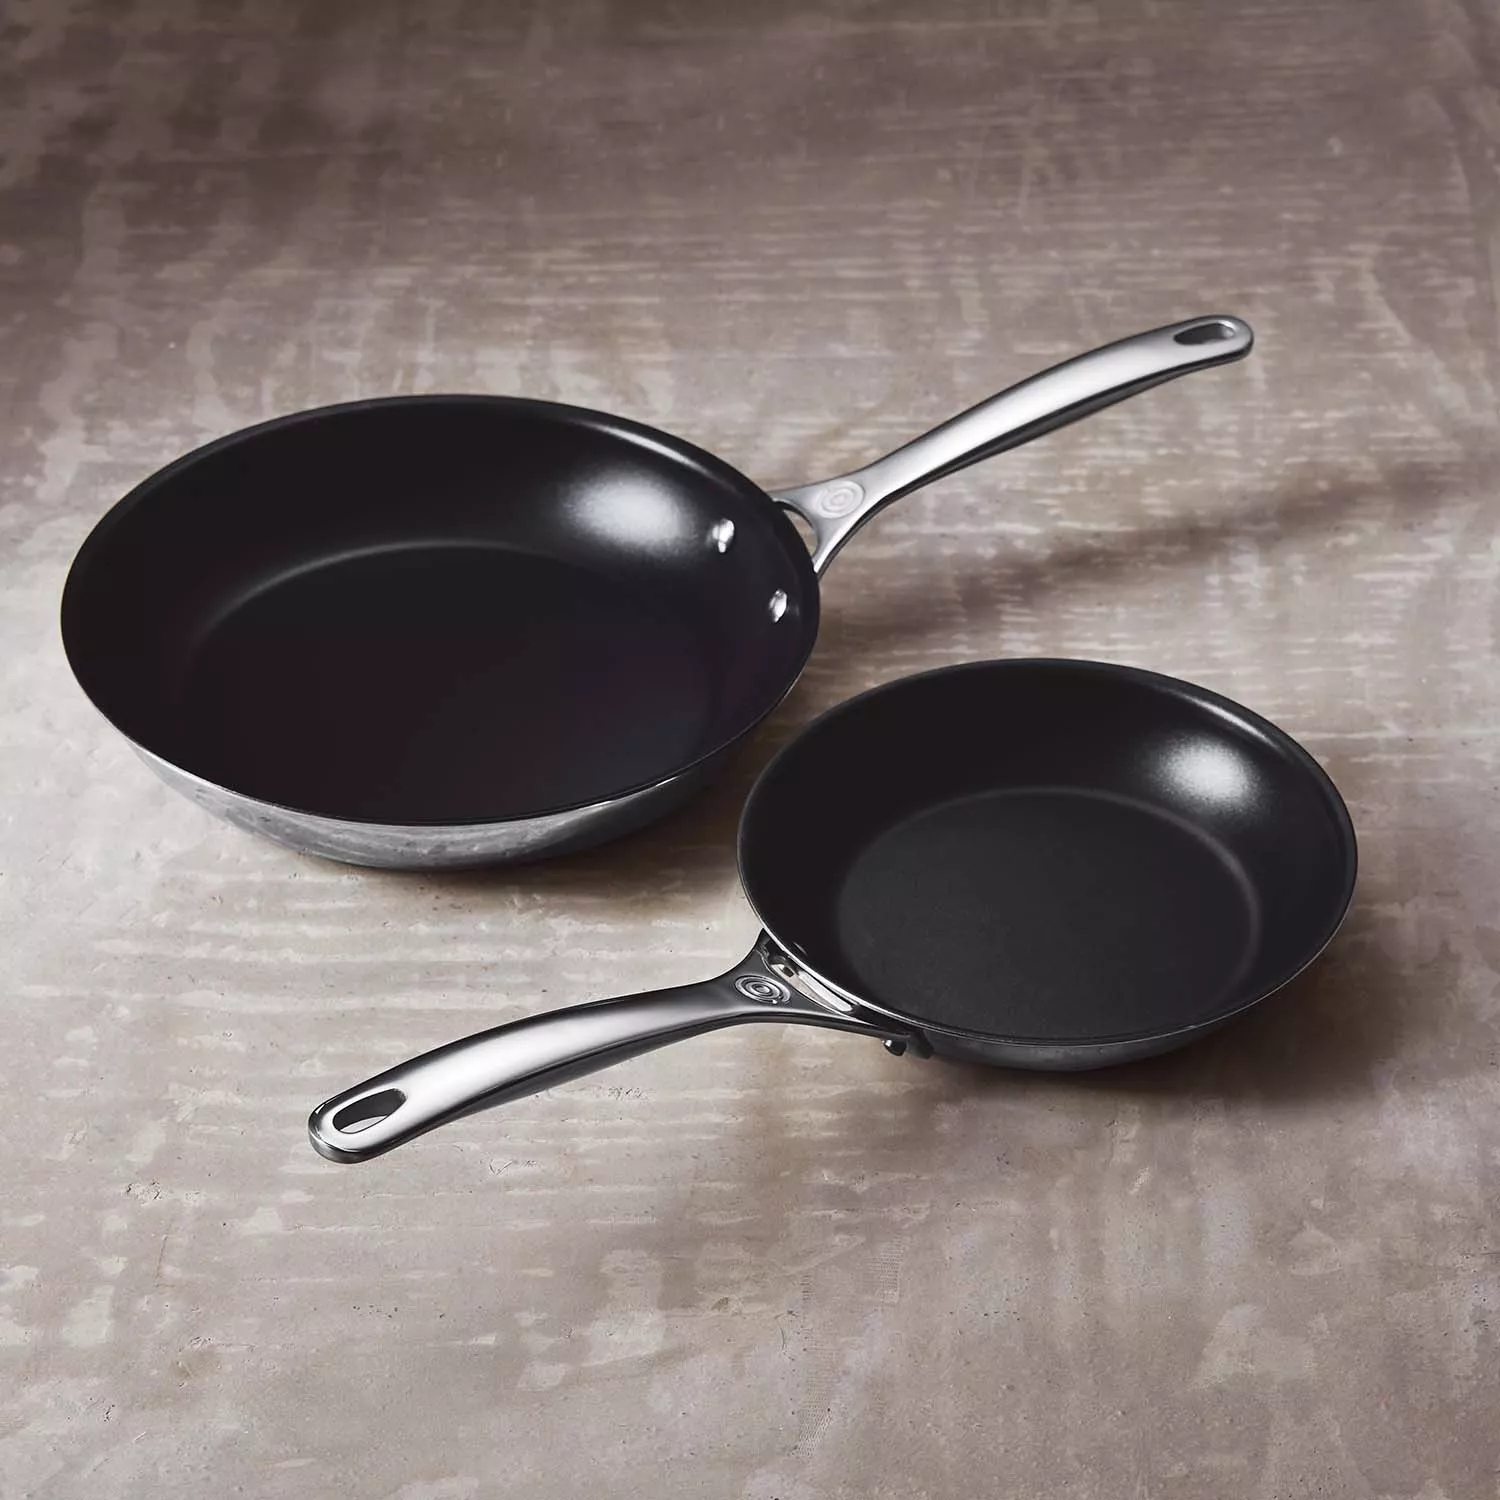 Le Creuset Toughened Non-Stick Pro 8 and 10 Fry Pan, Set of 2 + Reviews